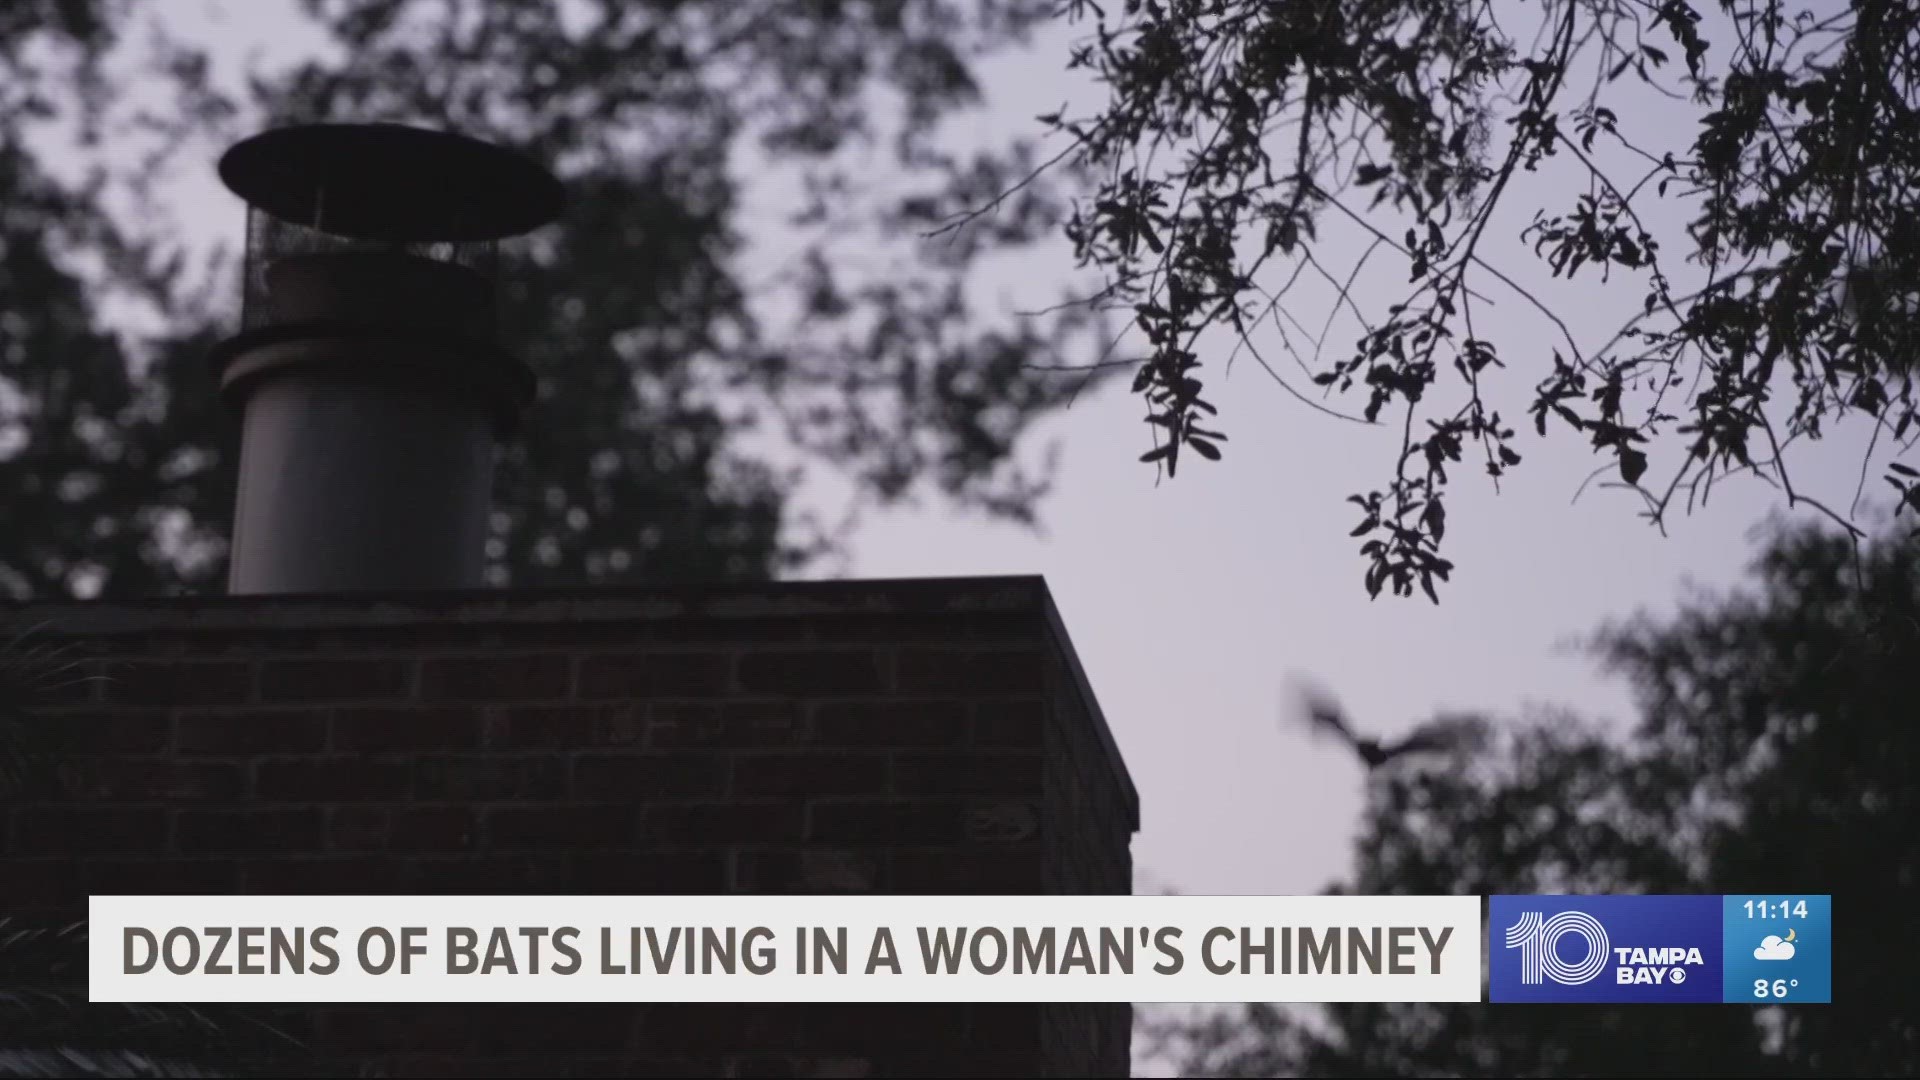 One Hillsborough County woman has dozens of bats living in her chimney, but according to FWC, she can't relocate them until mid August.